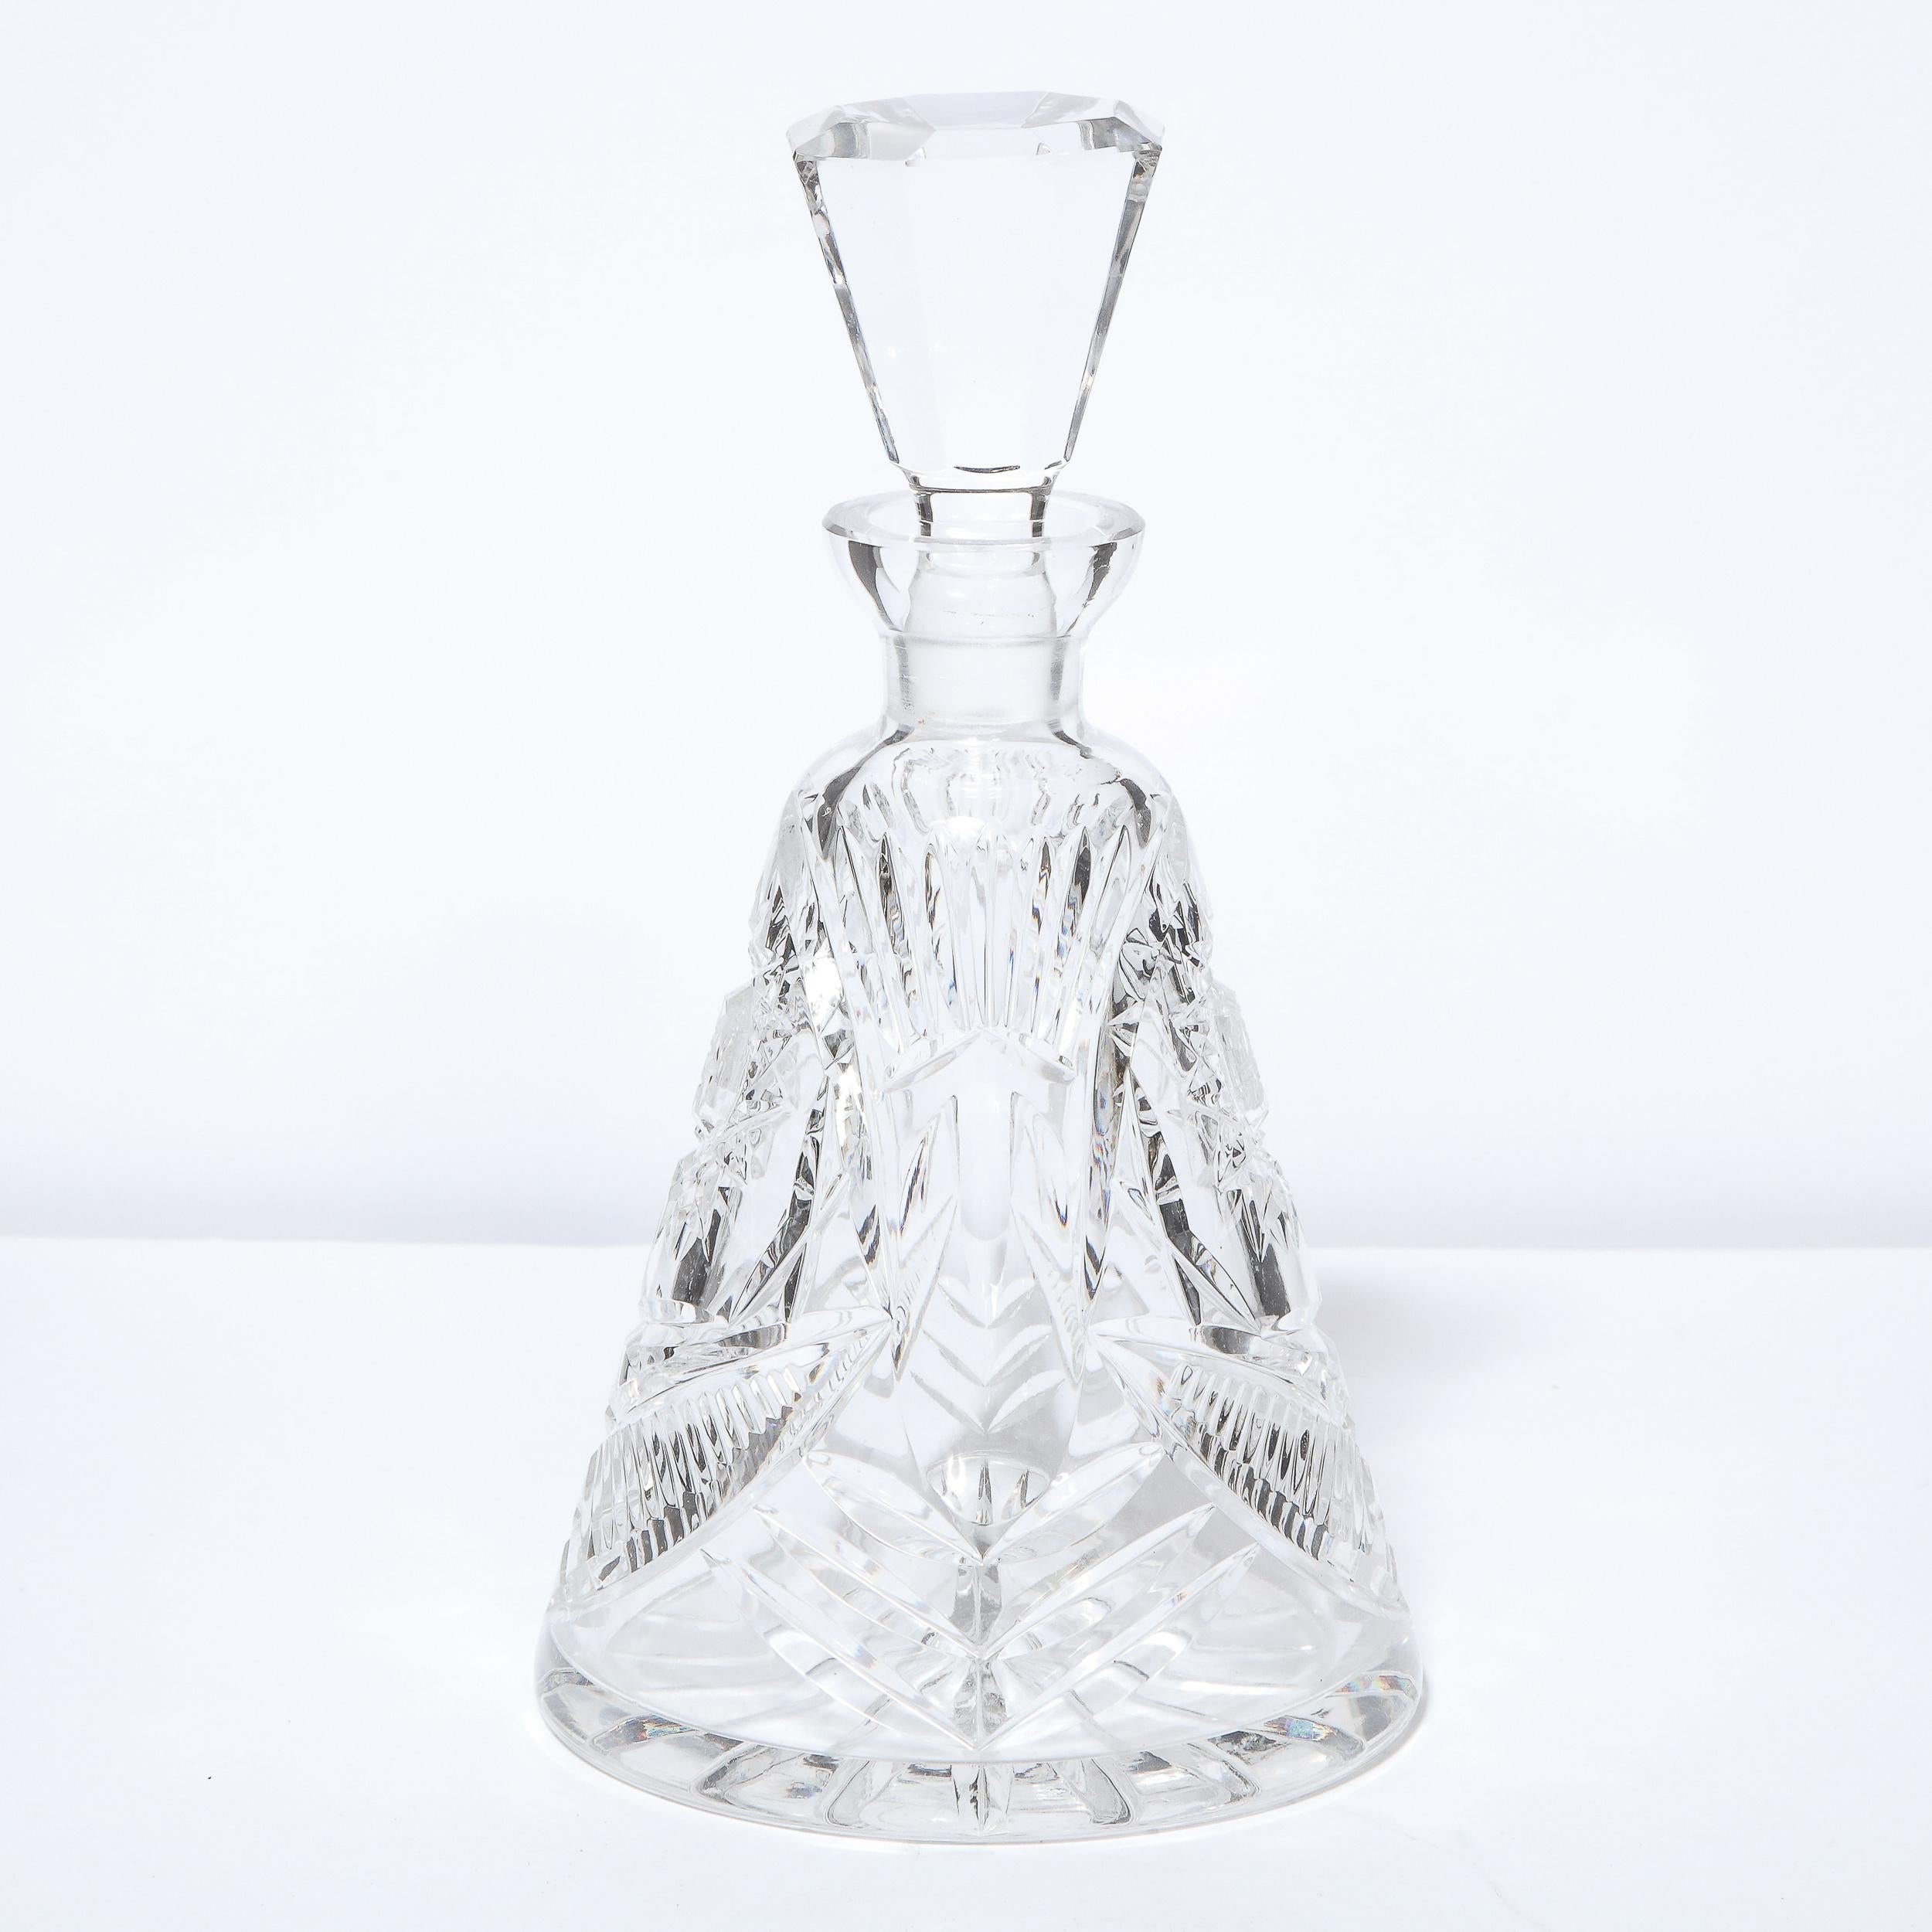 Mid-20th Century Mid-Century Modern Translucent Etched Crystal Decanter with Geometric Patterns